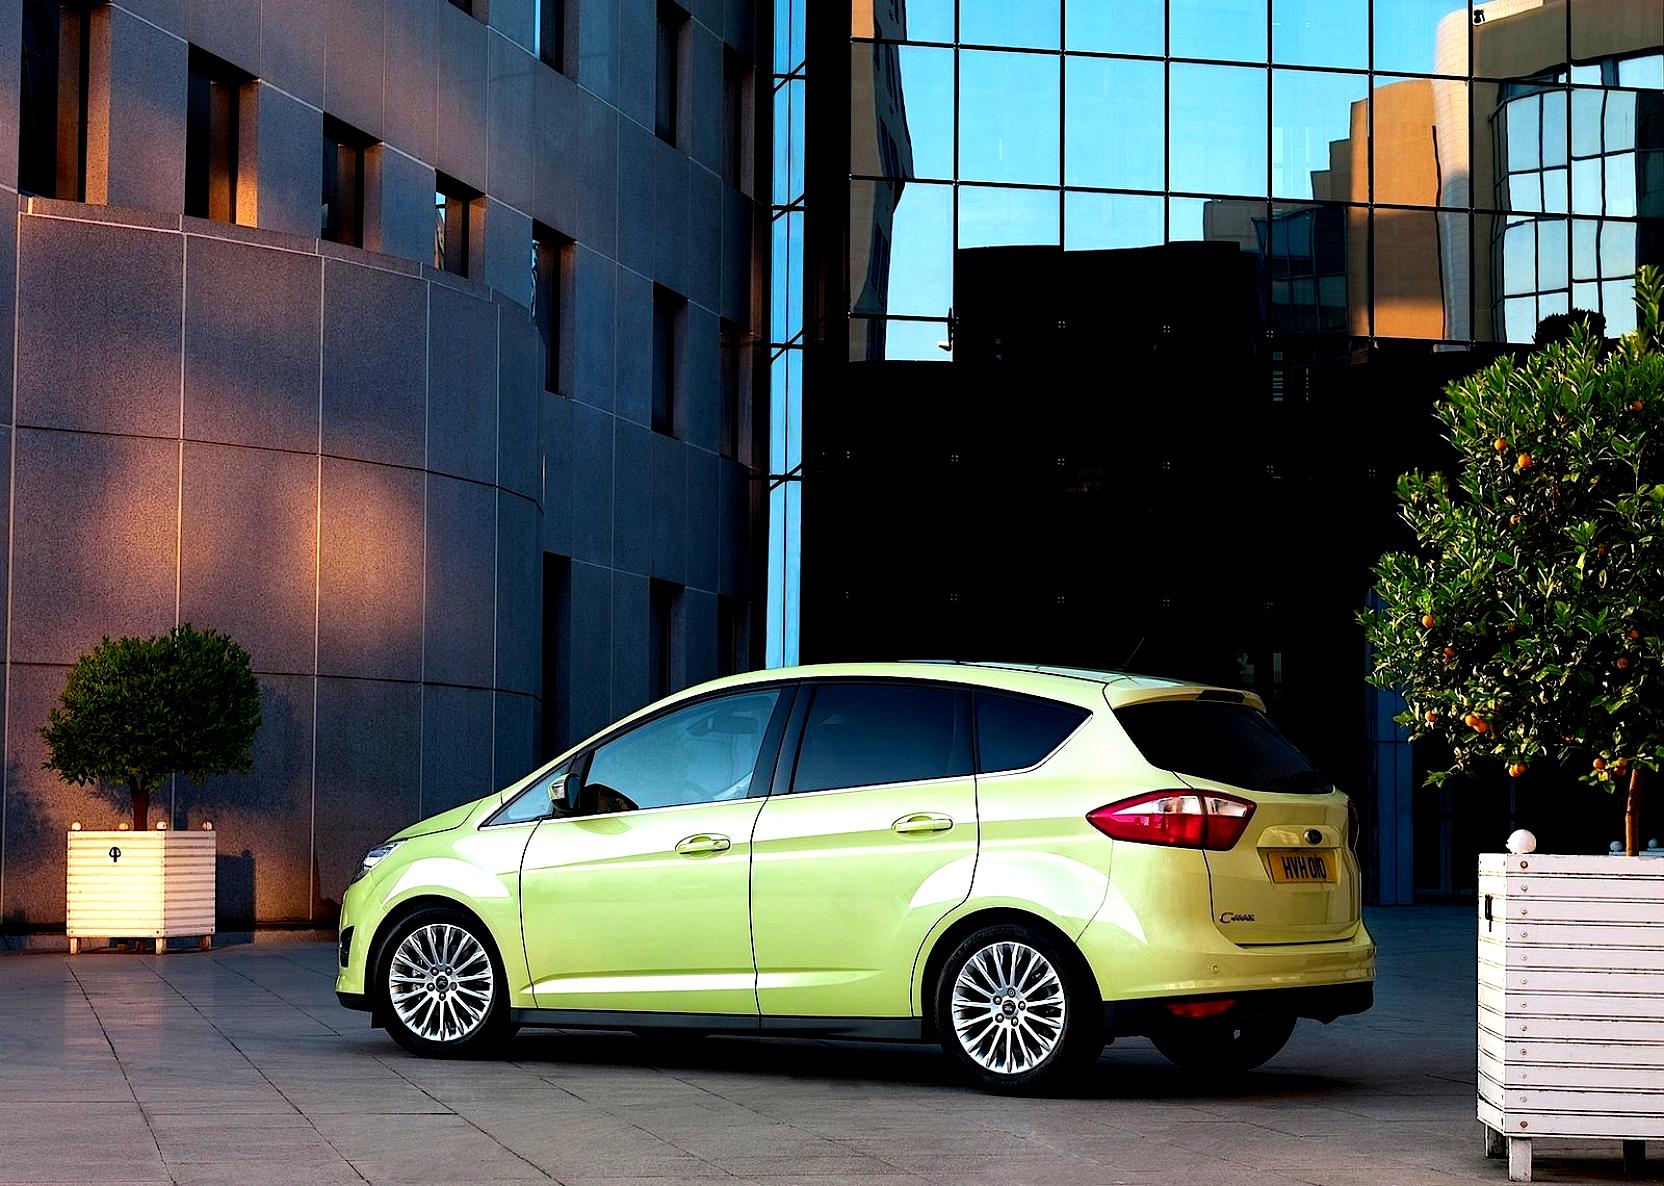 Ford C-Max 2010 #32